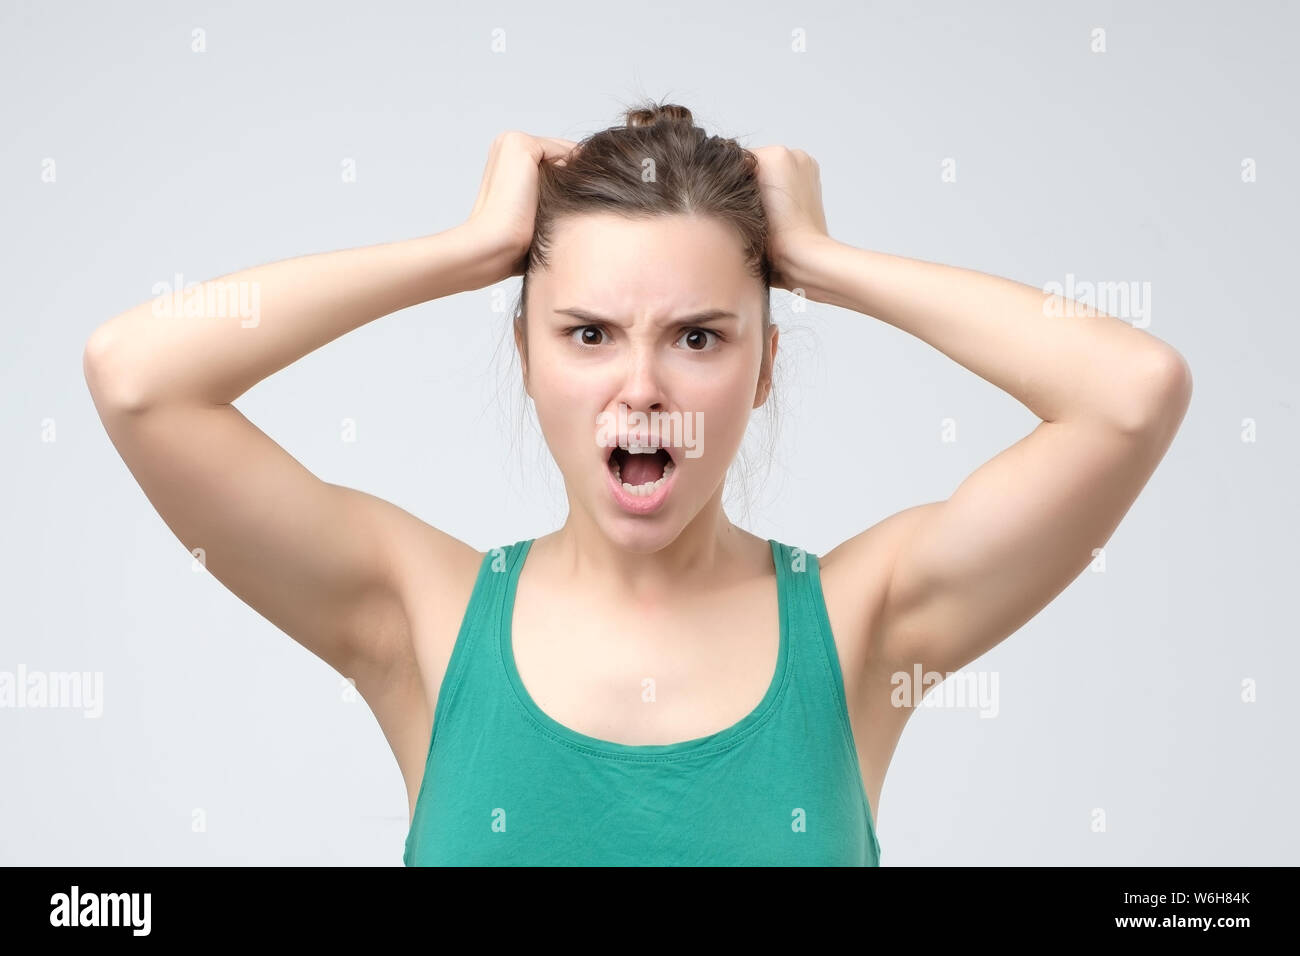 Furious angry woman screaming with rage and frustration Stock Photo